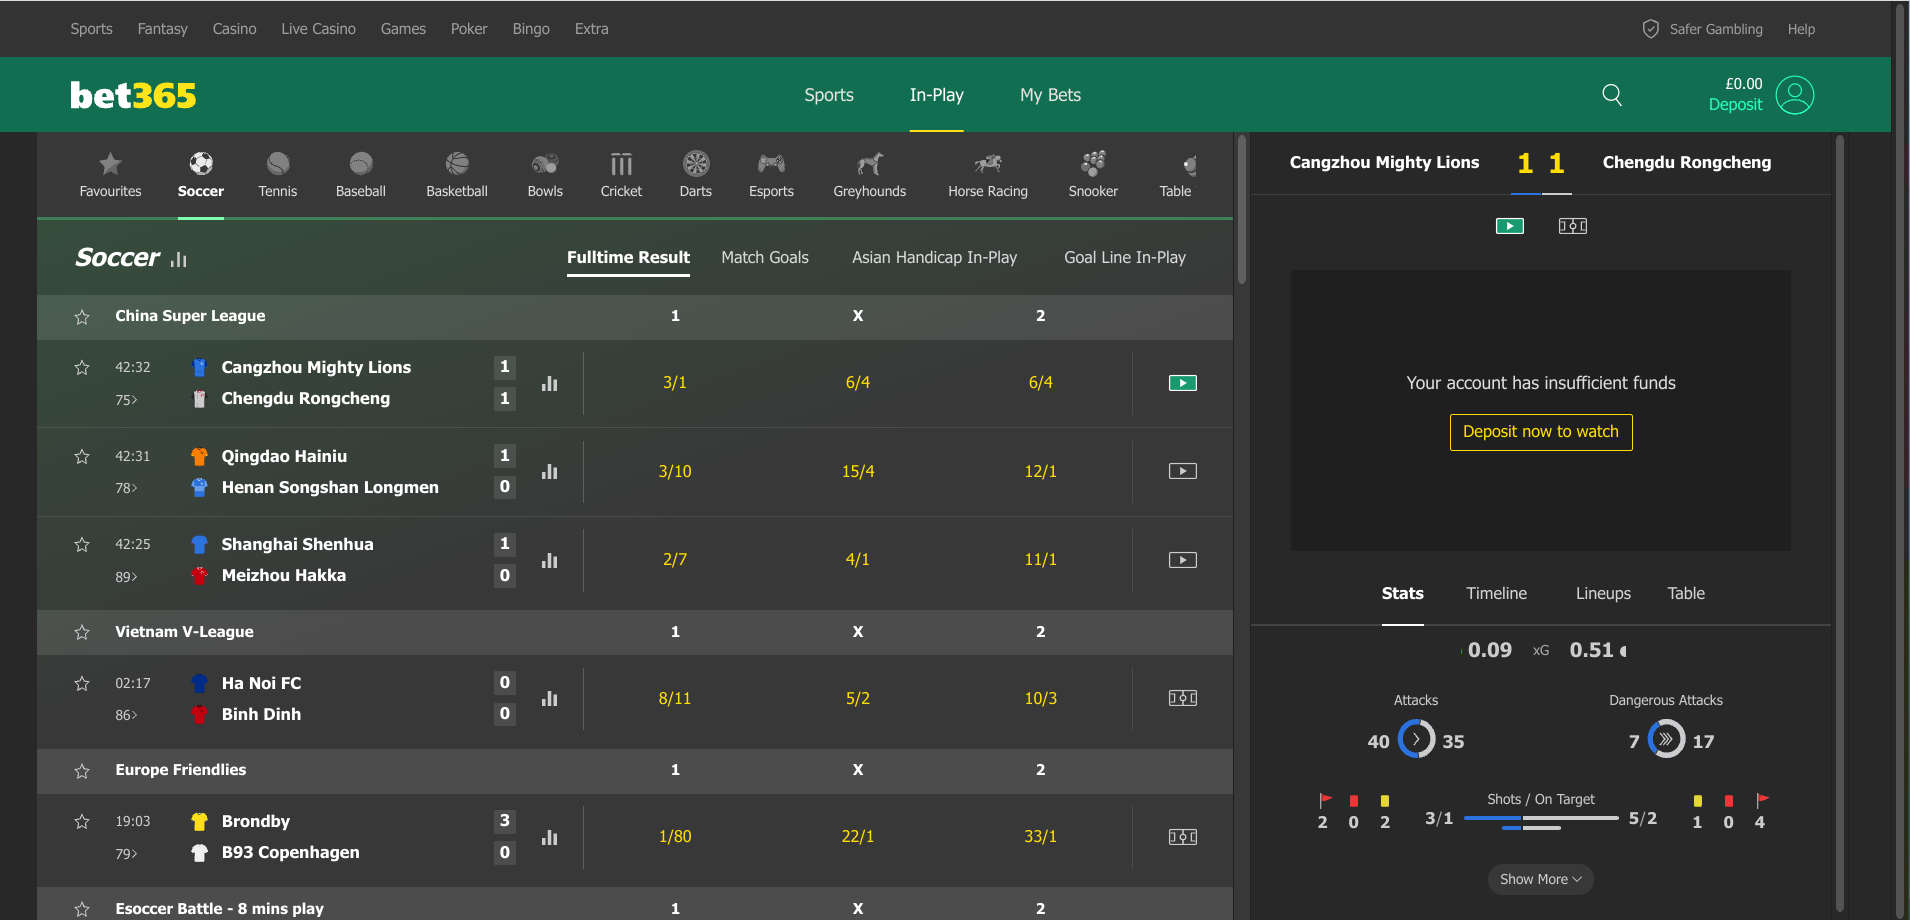 How to place an in play bet at Bet365